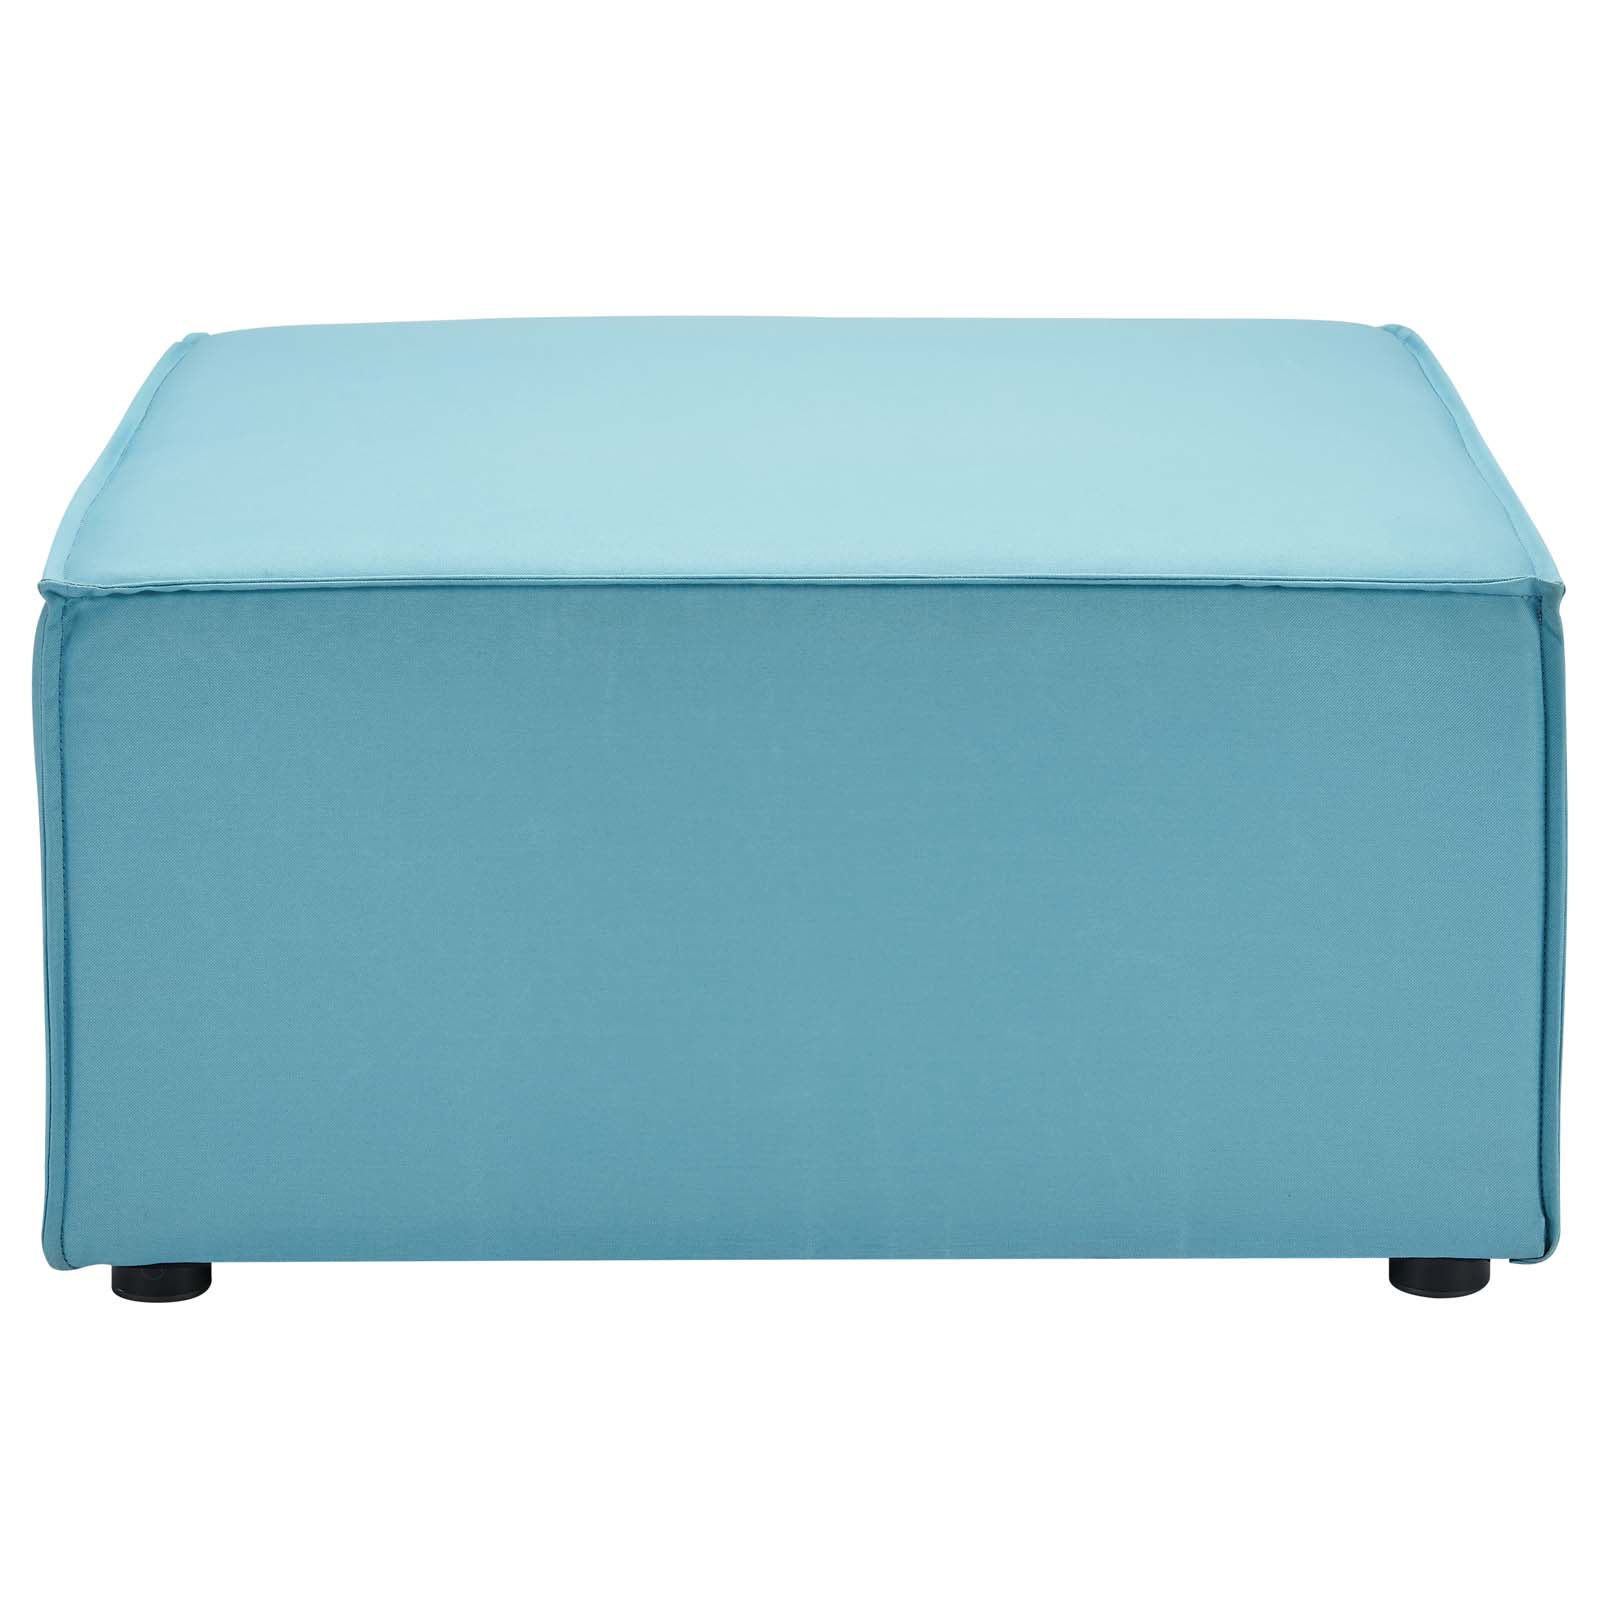 Lounge Chair Ottoman, Fabric, Blue, Modern Contemporary Urban Design, Outdoor Patio Balcony Cafe Bistro Garden Furniture Hotel Hospitality - image 4 of 6